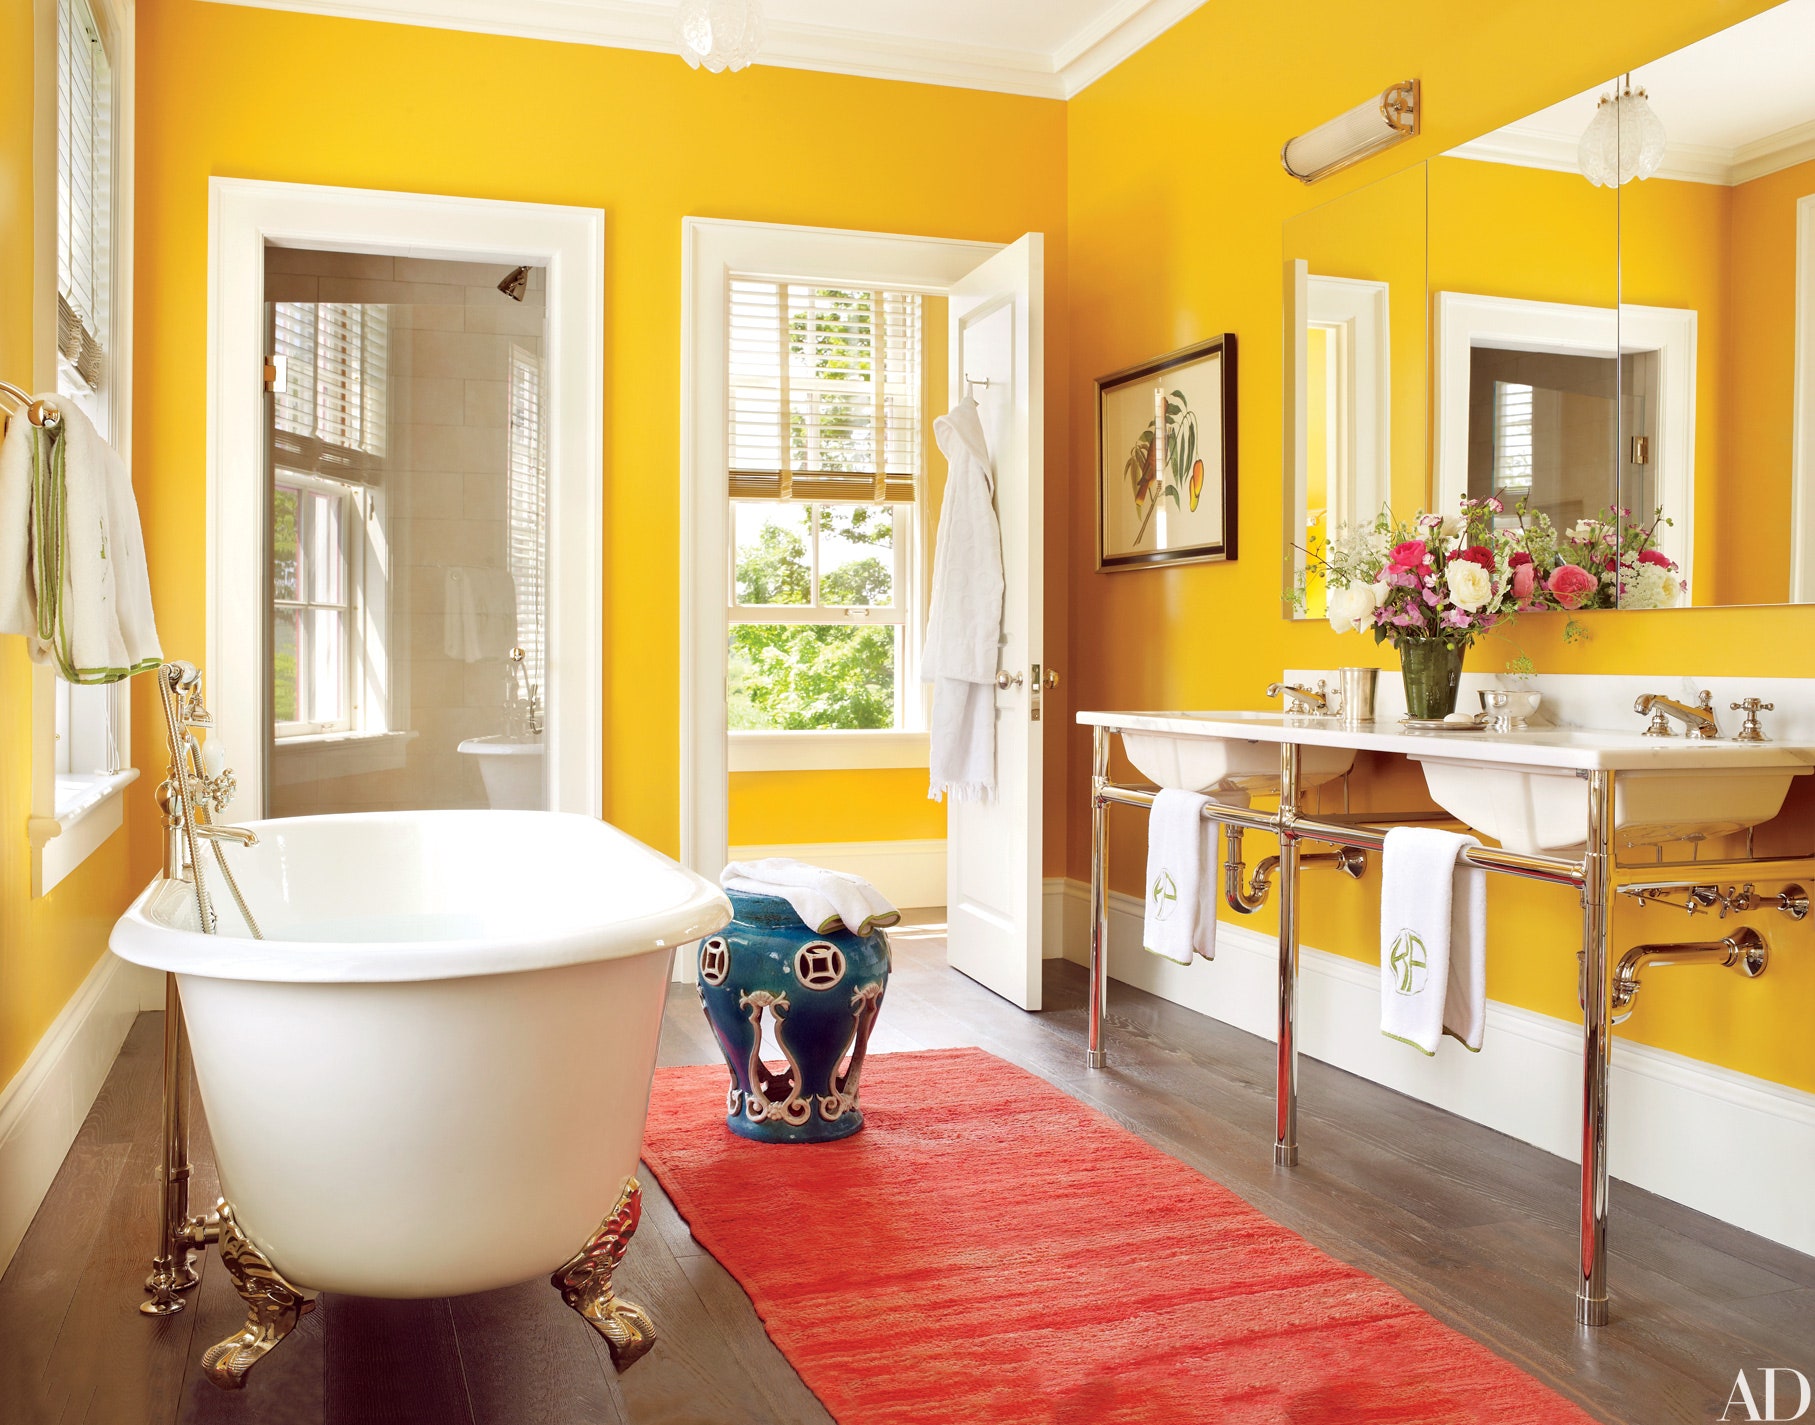 Decorate your bathroom paint